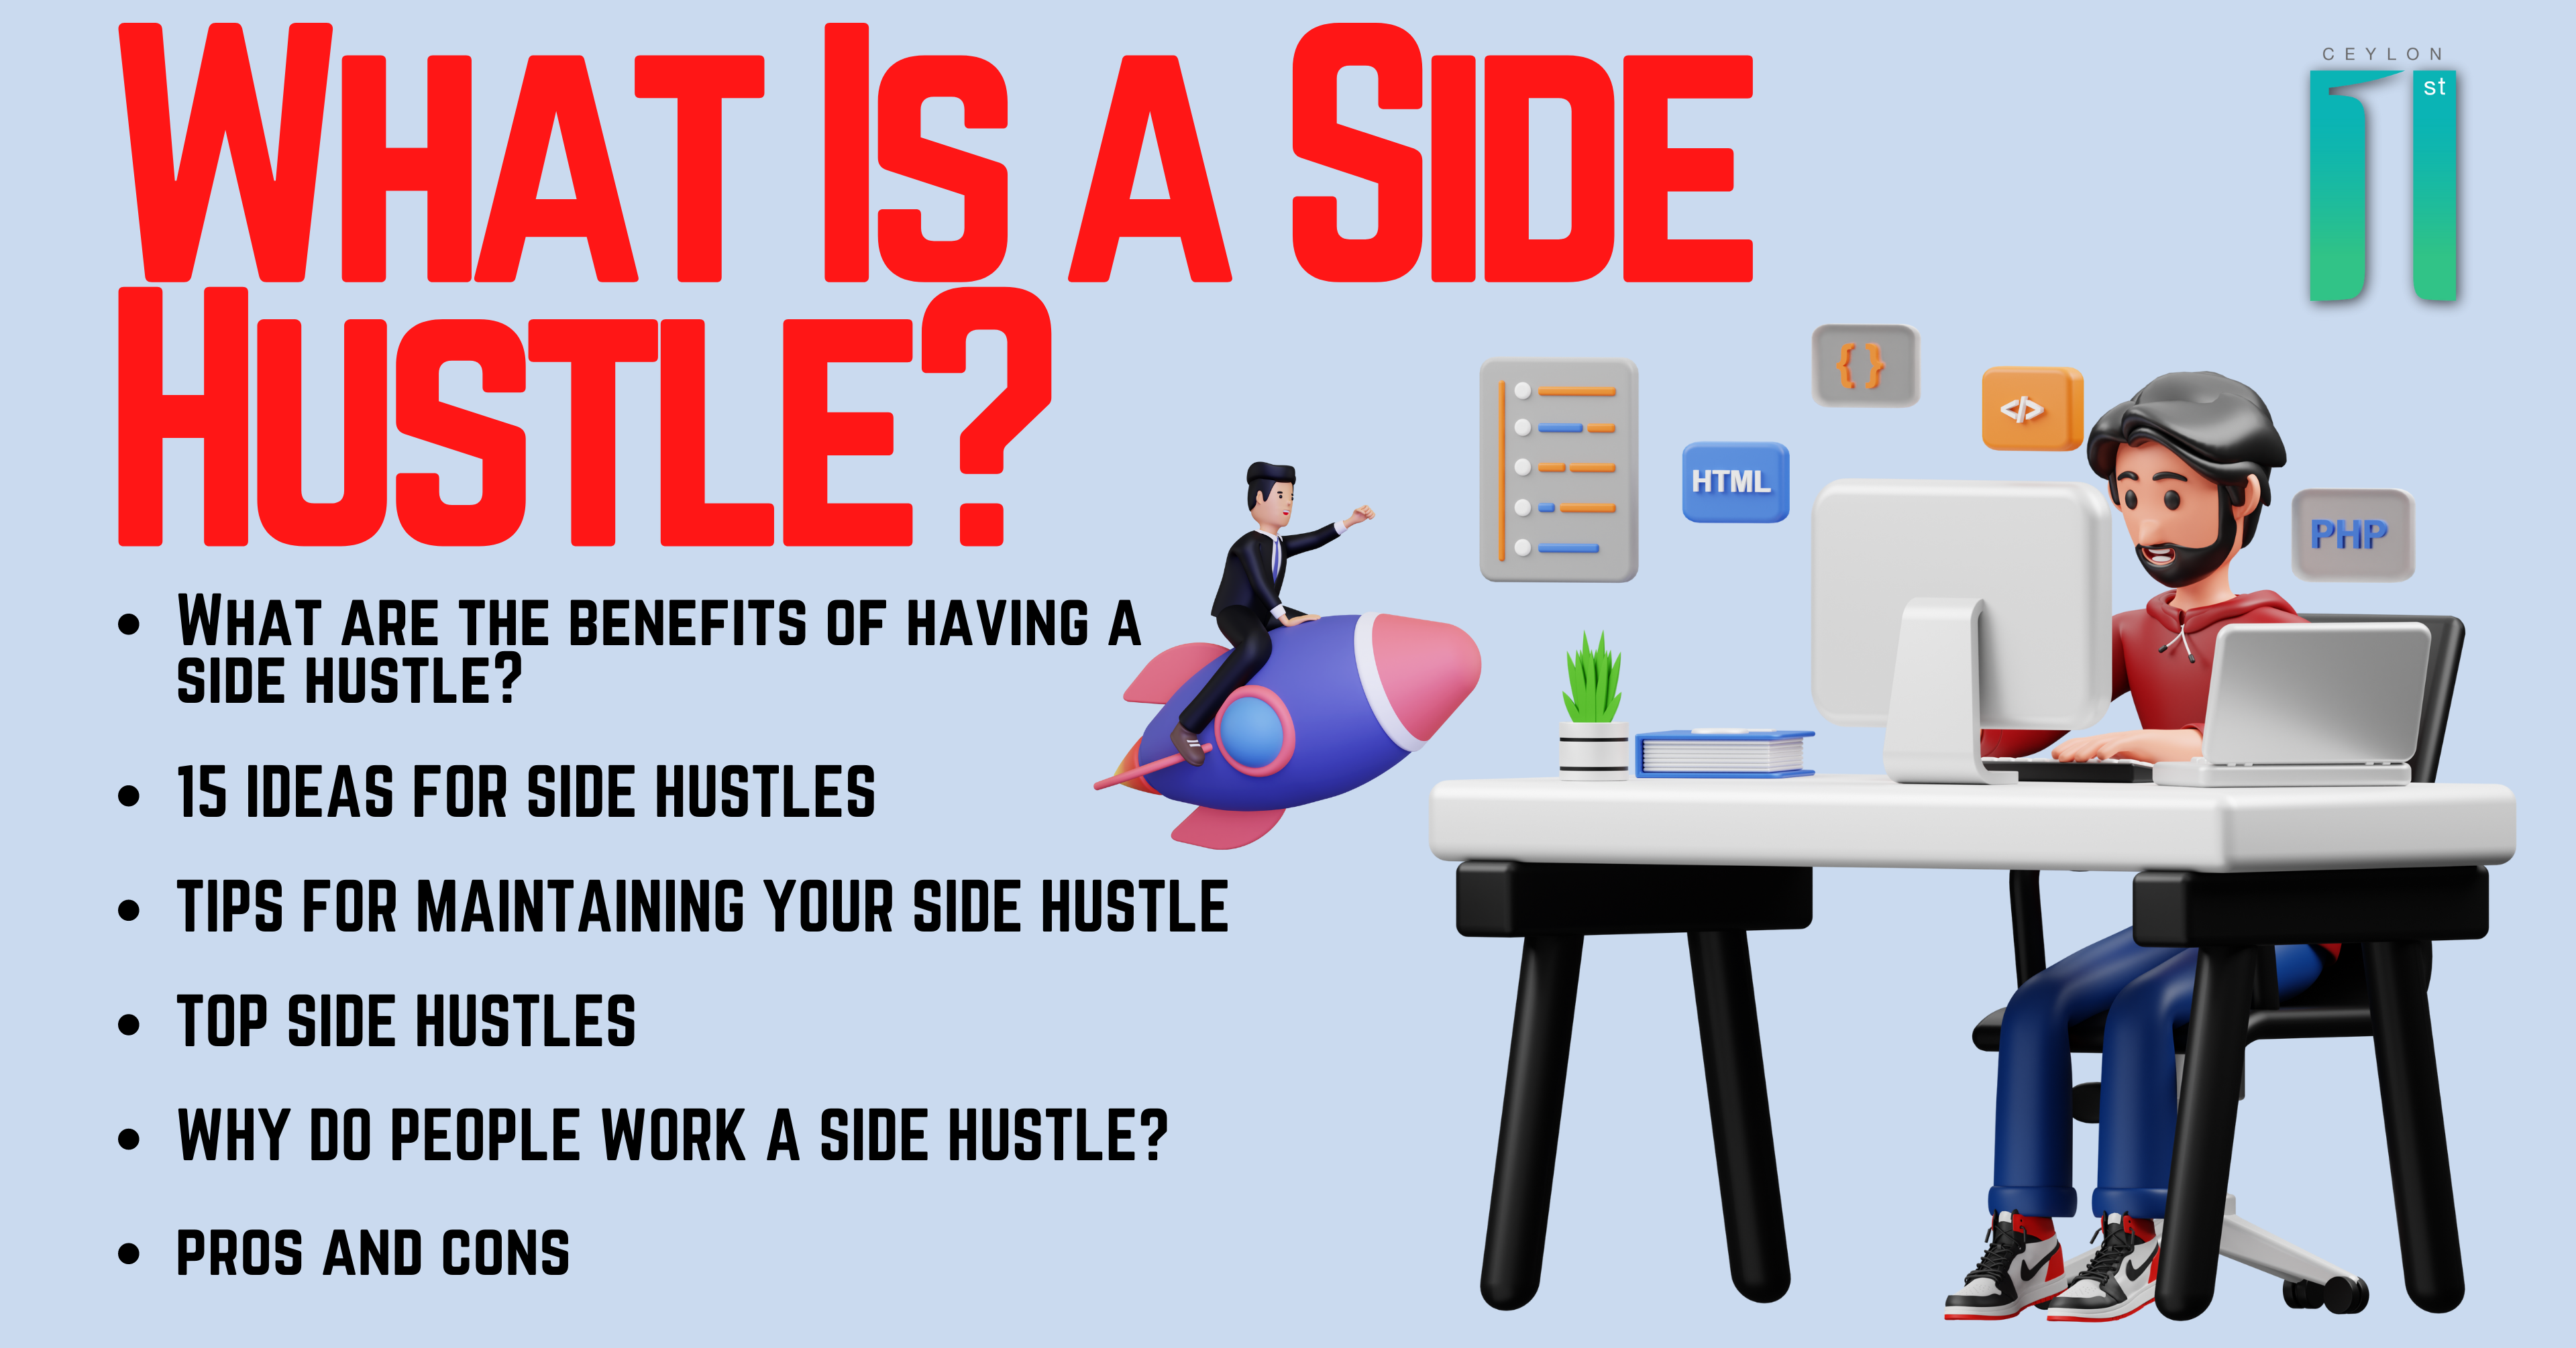 What Is a Side Hustle